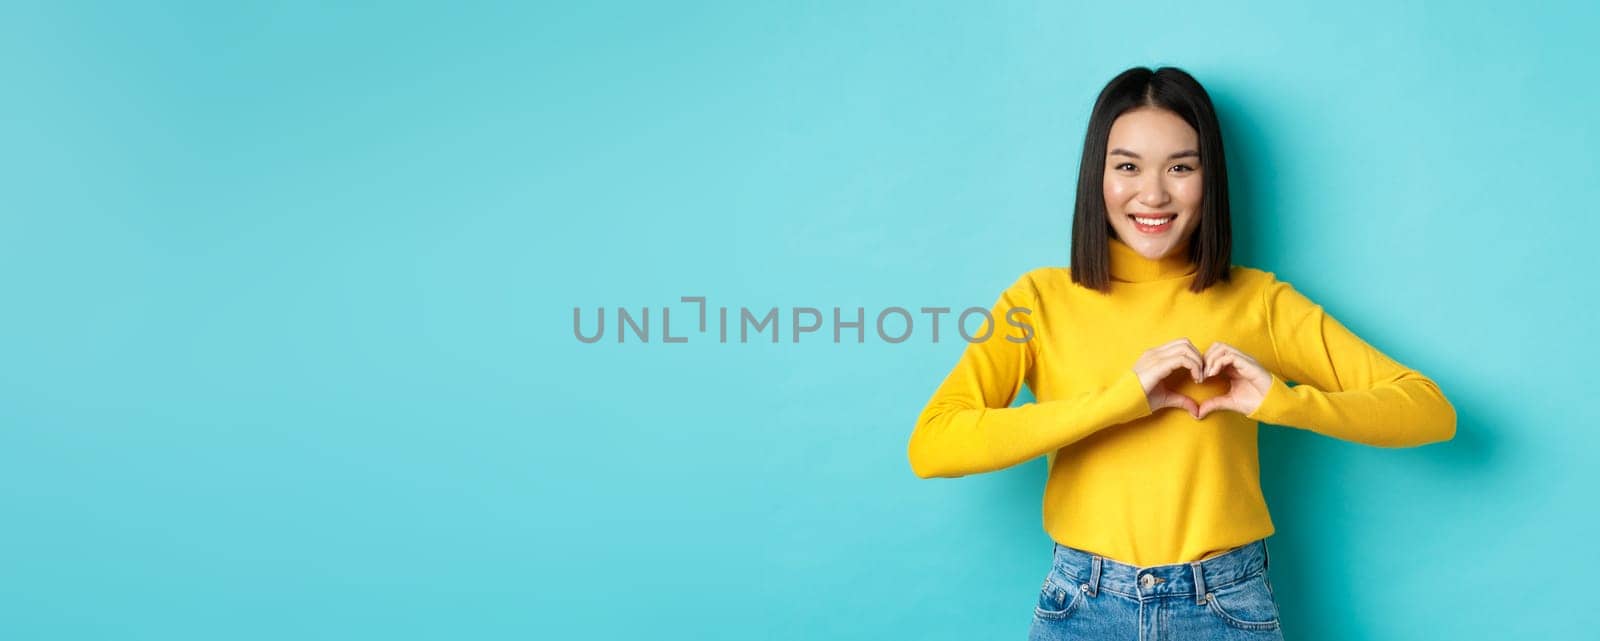 Valentines day and romance concept. Beautiful asian woman show I love you, heart gesture and smiling, standing against blue background.